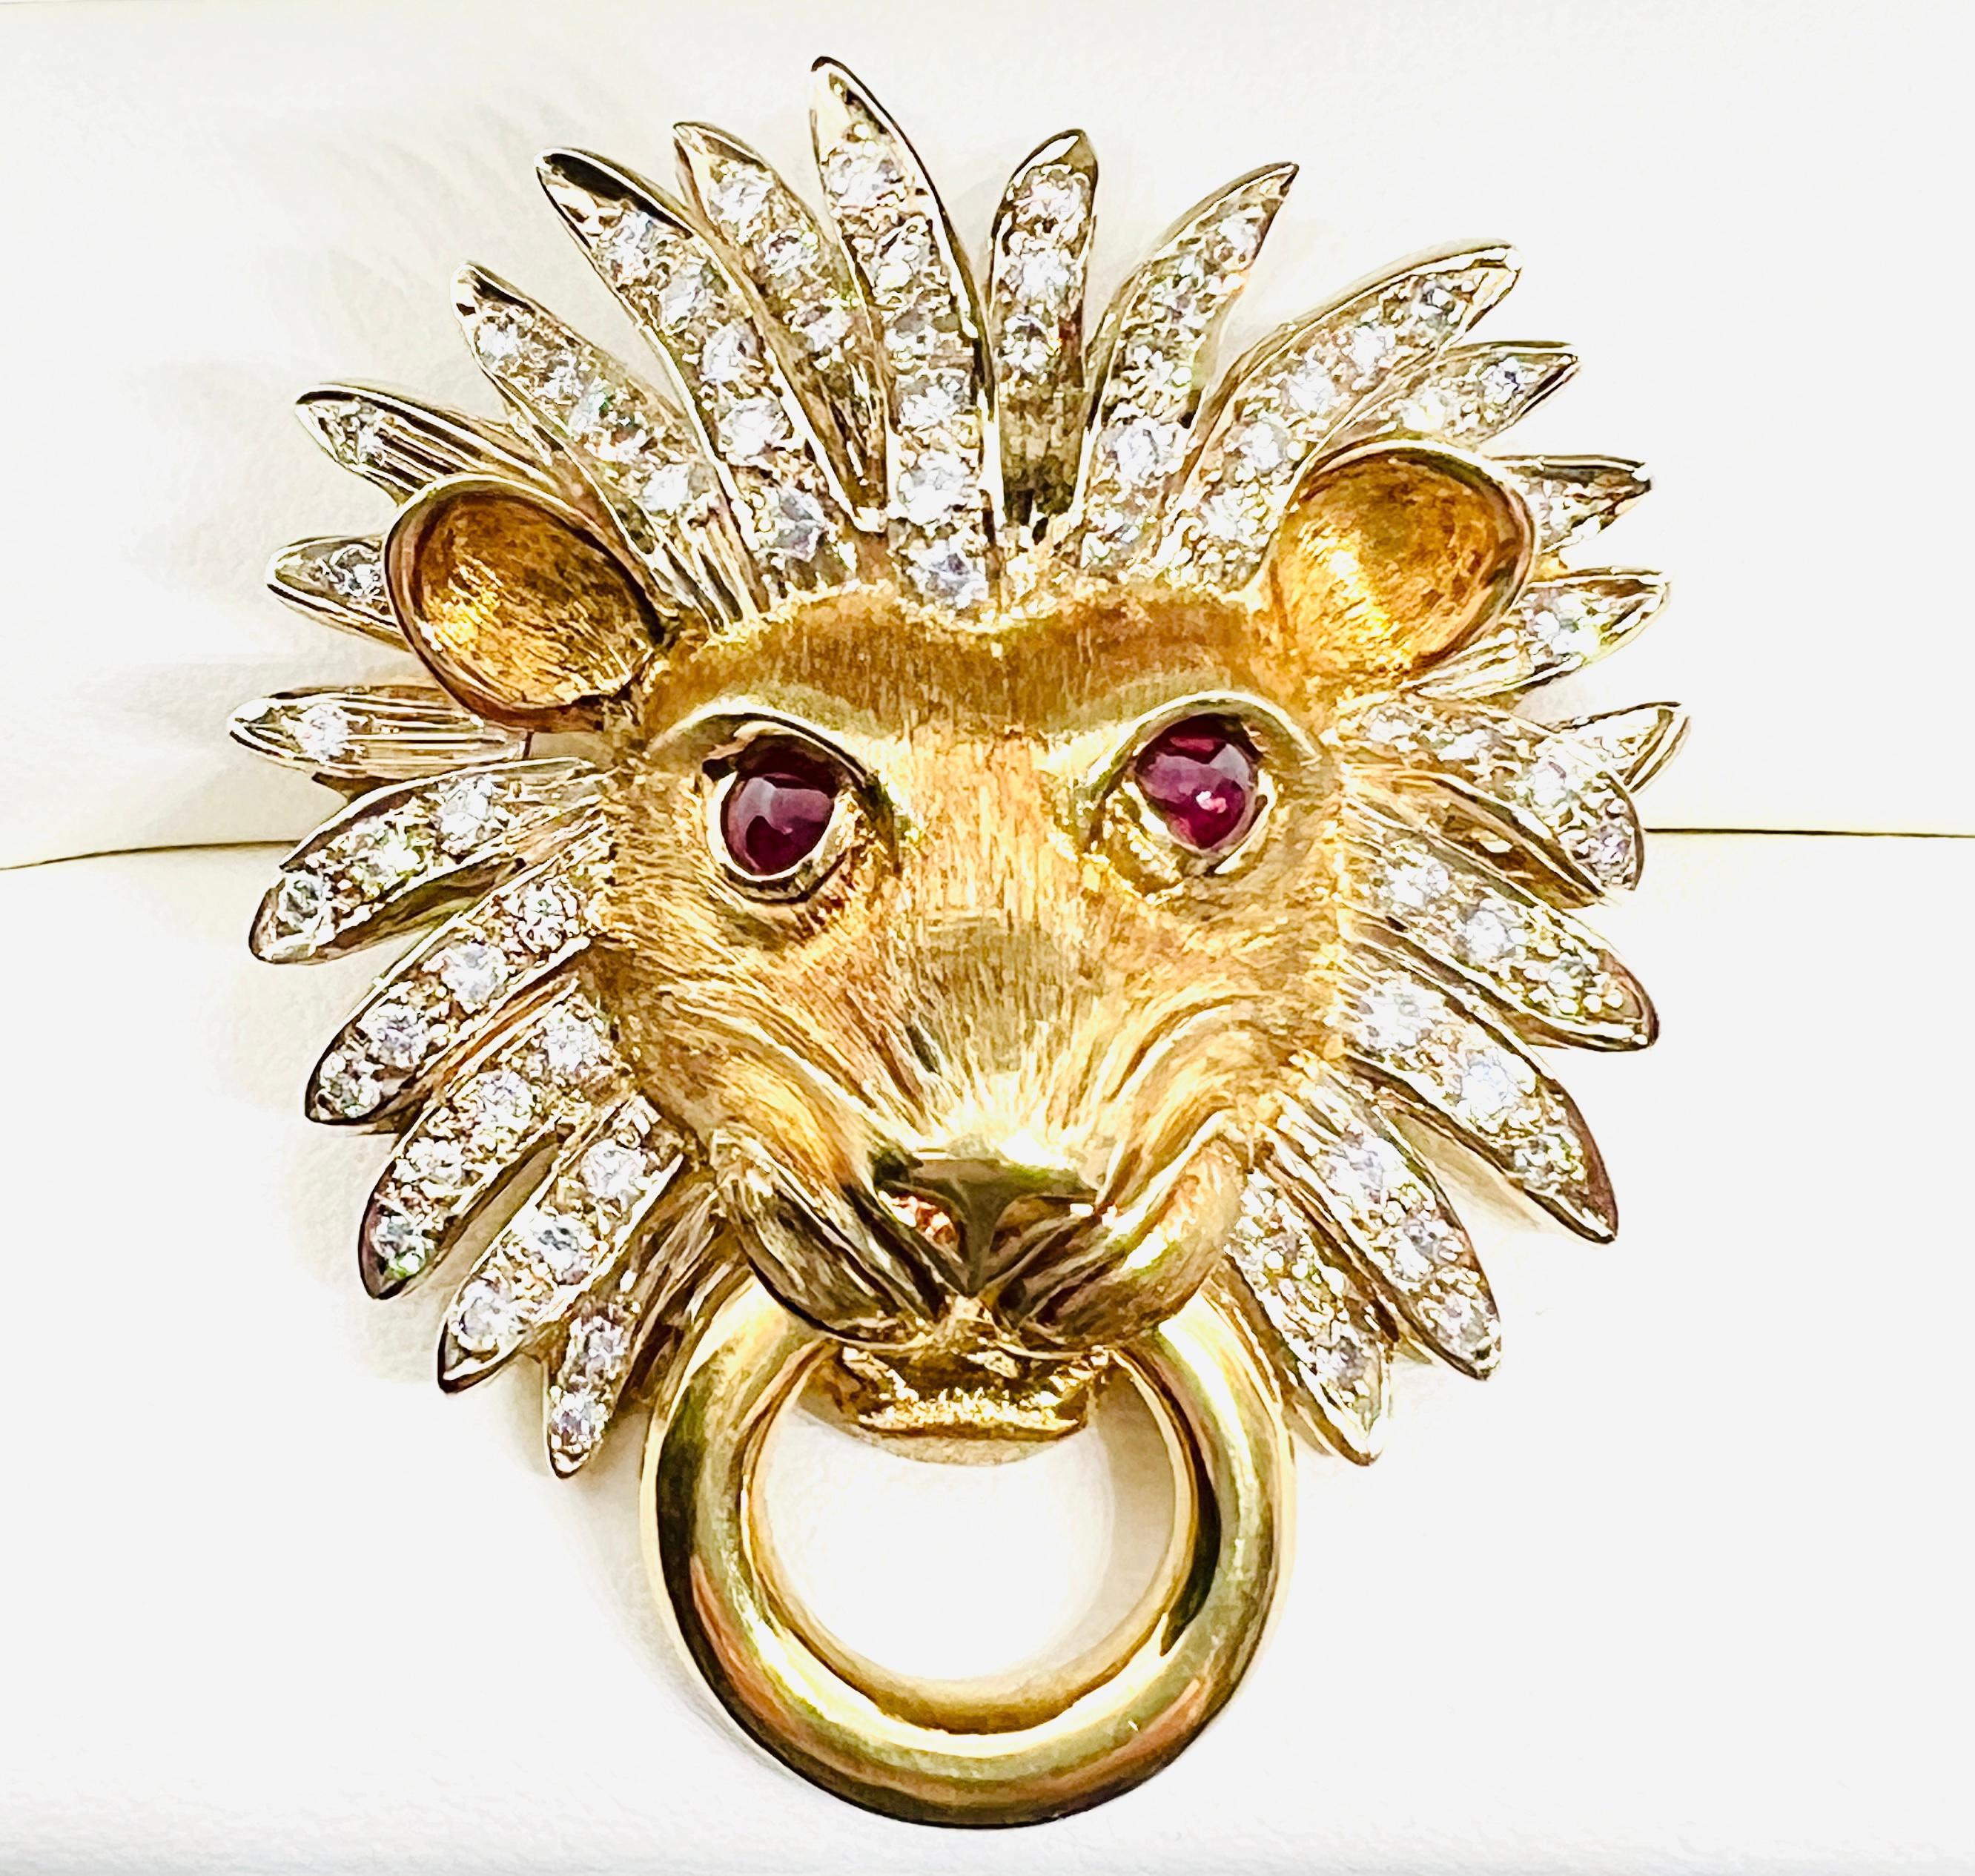 Gorgeous Adler 18K Yellow Gold Lionshead Doorknocker pendant / enhancer. This Vintage piece features 76 diamonds in the lion's mane and two cabochon rubies as the eyes. The piece measures 1.75 inches by 1.25 inches and weighs 30.4 grams. The Adler